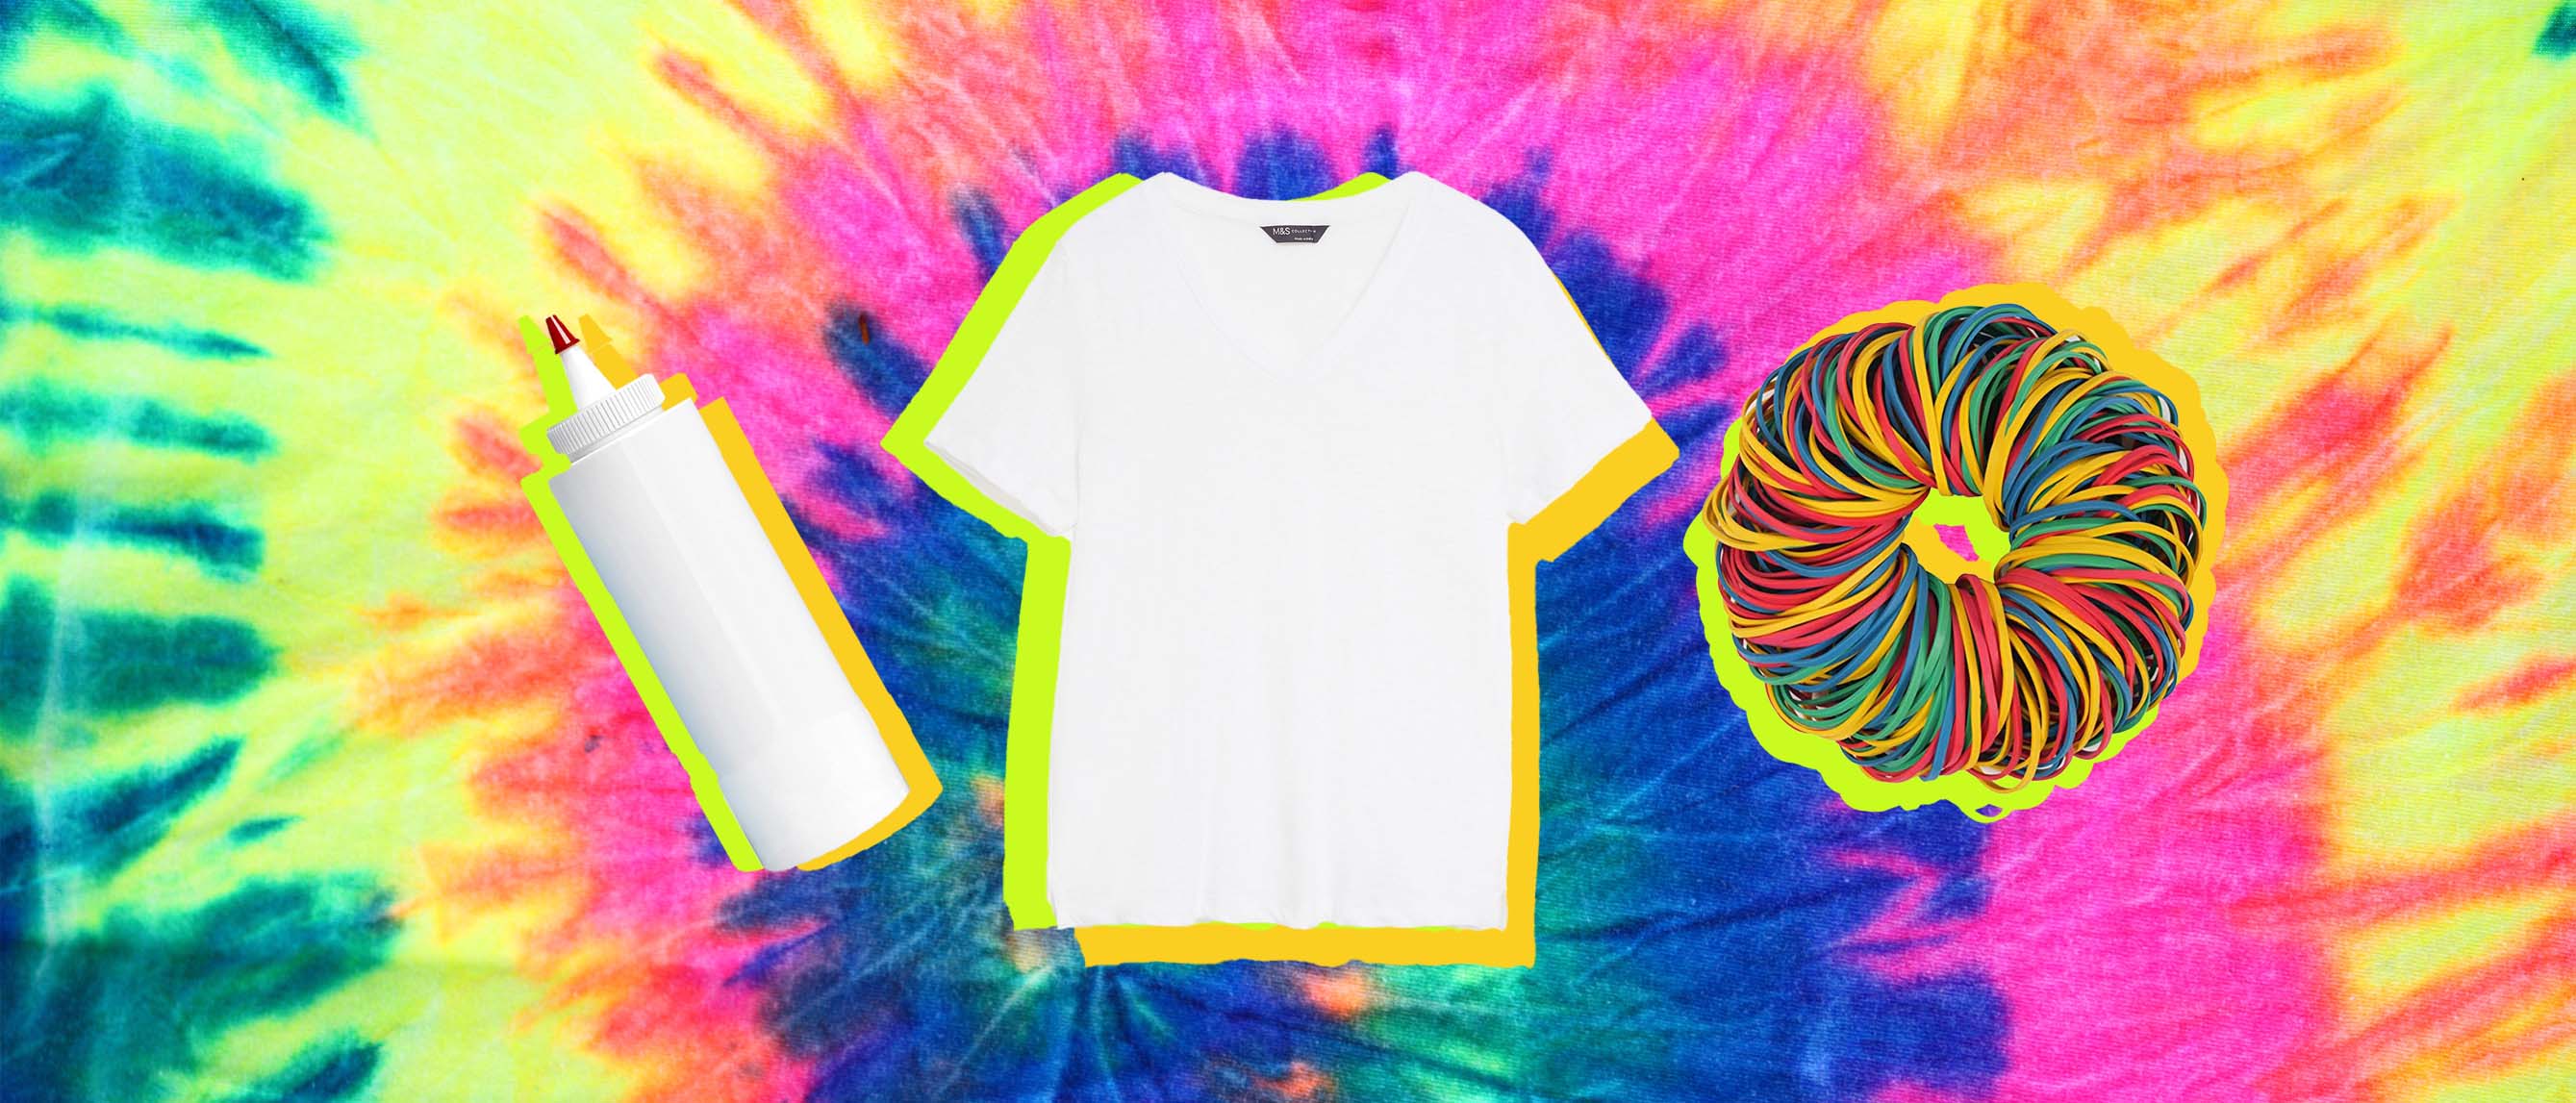 How to tie dye: Your basic guide - Daily Mail